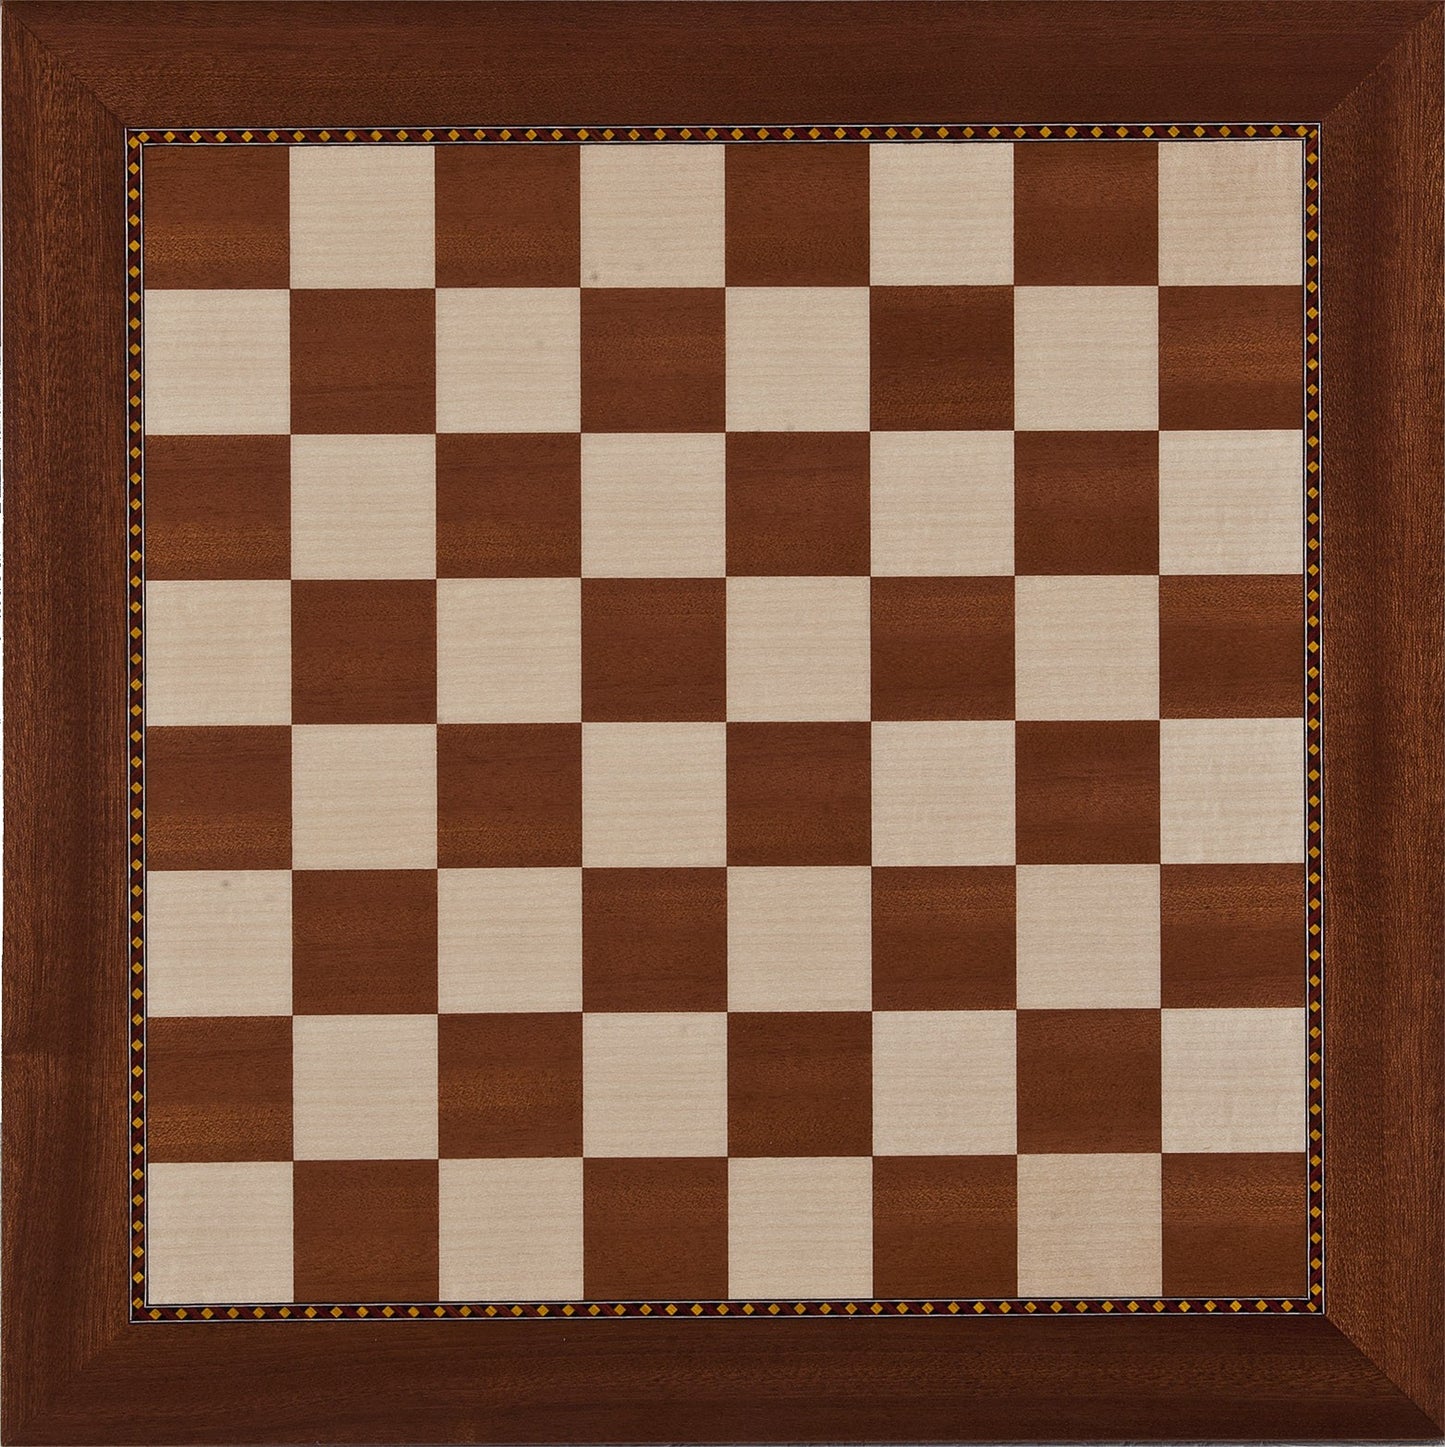 18 Inch Designers Board from Spain (1 3/4 Inch Squares)